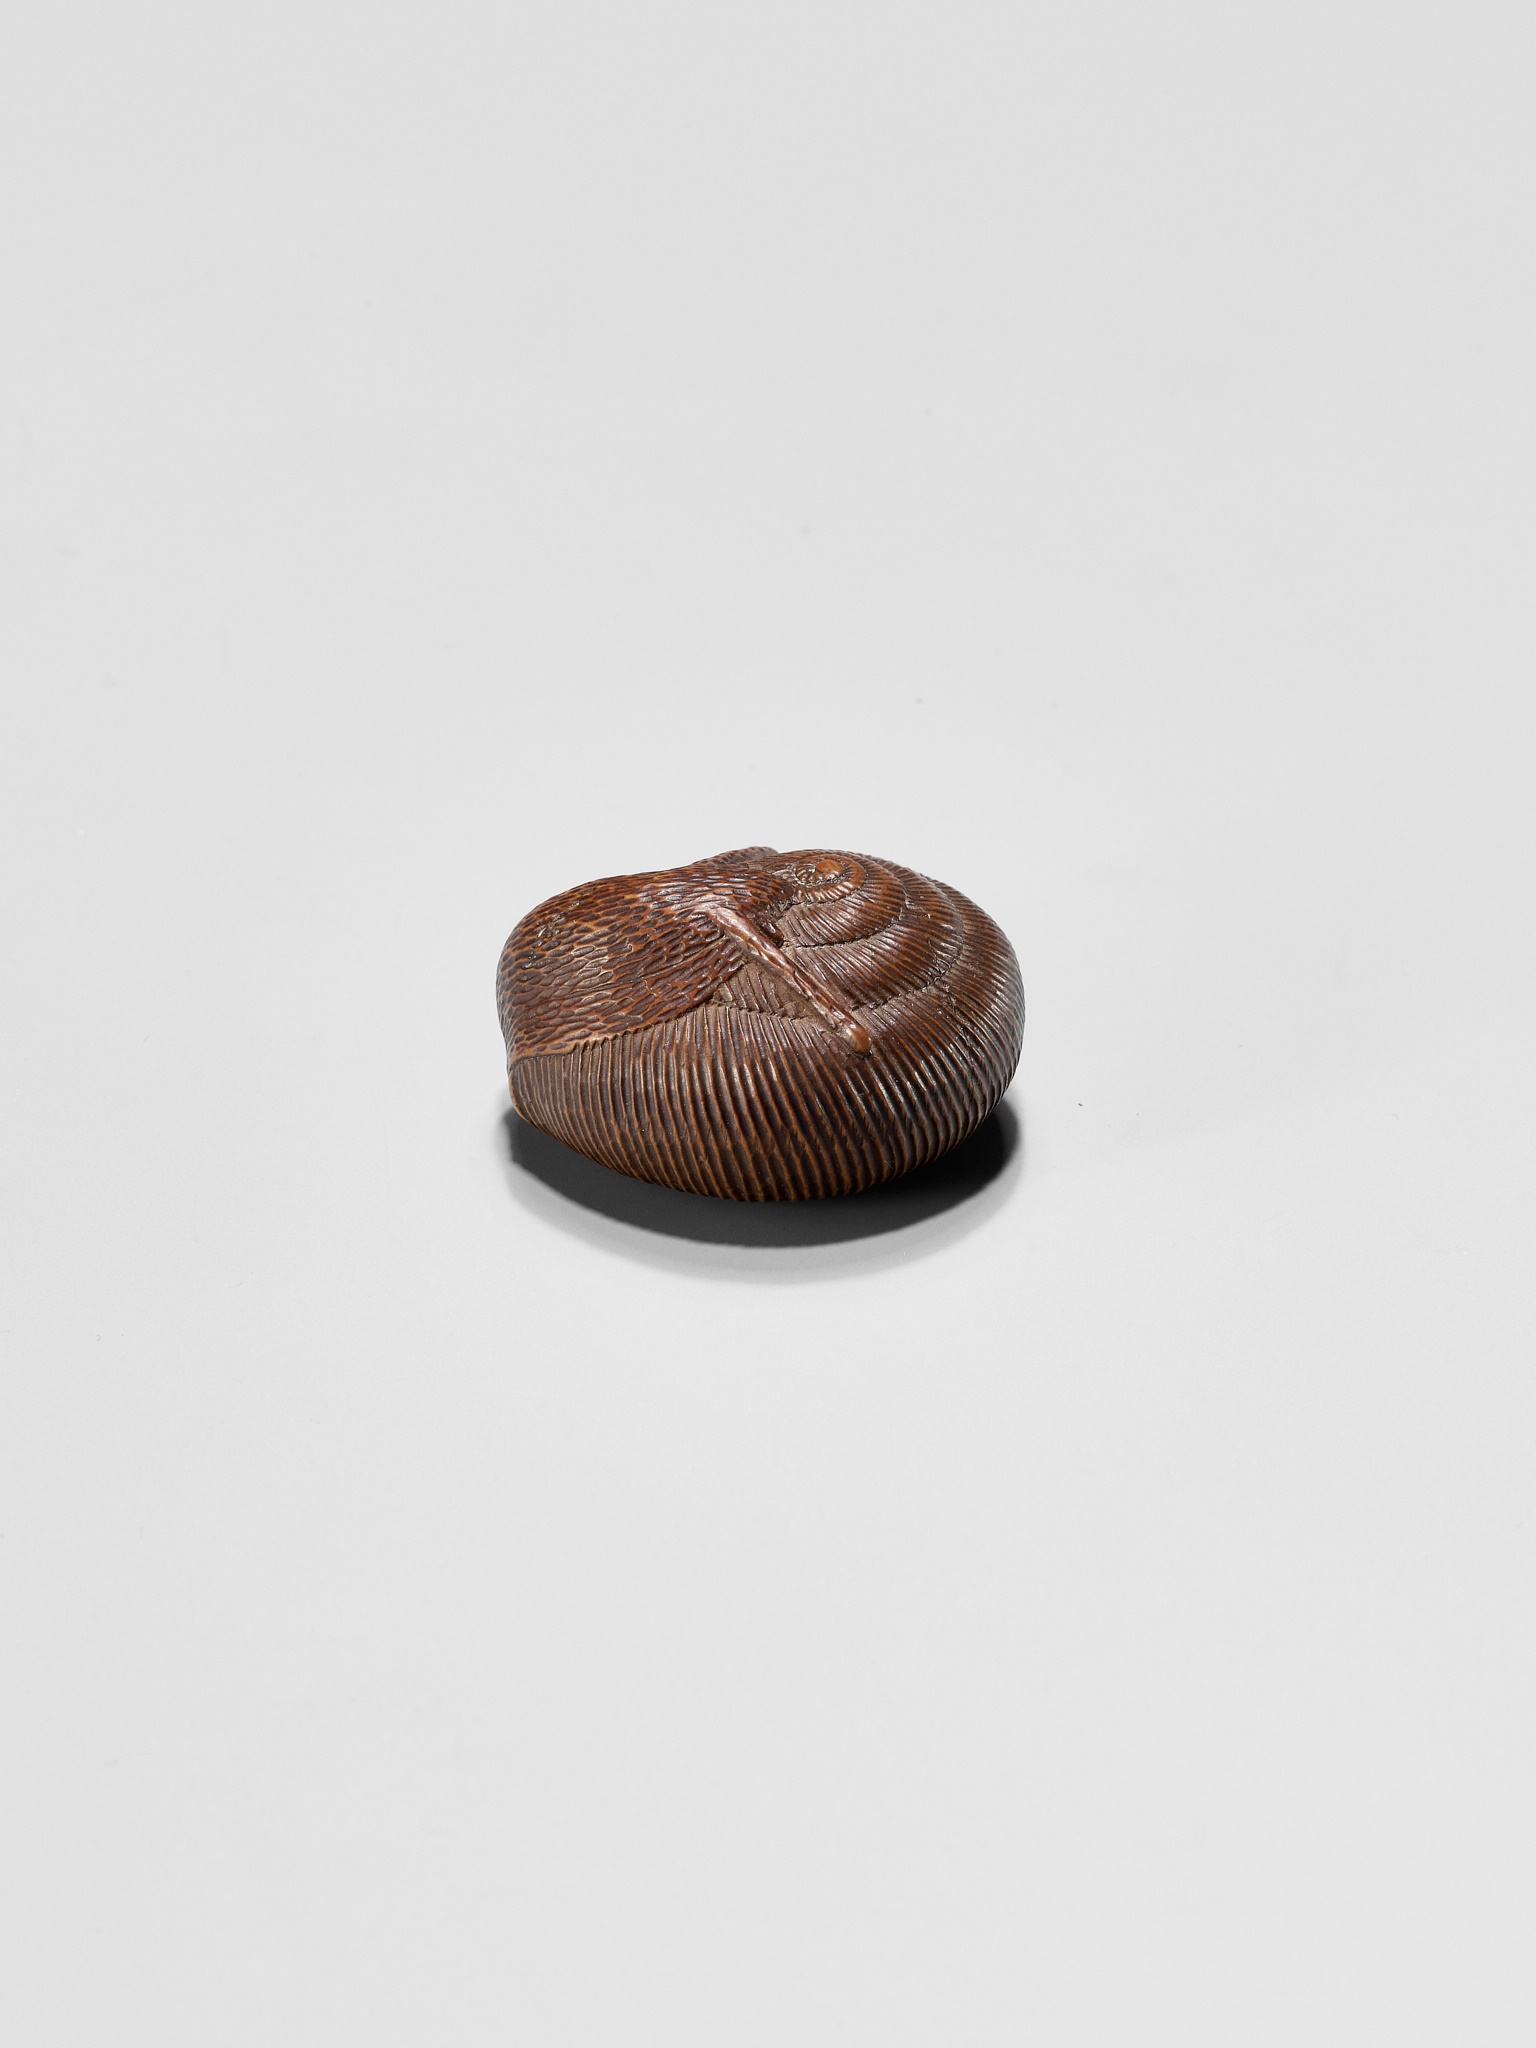 SARI: A FINE WOOD NETSUKE OF A SNAIL EMERGING FROM ITS SHELL - Image 8 of 12